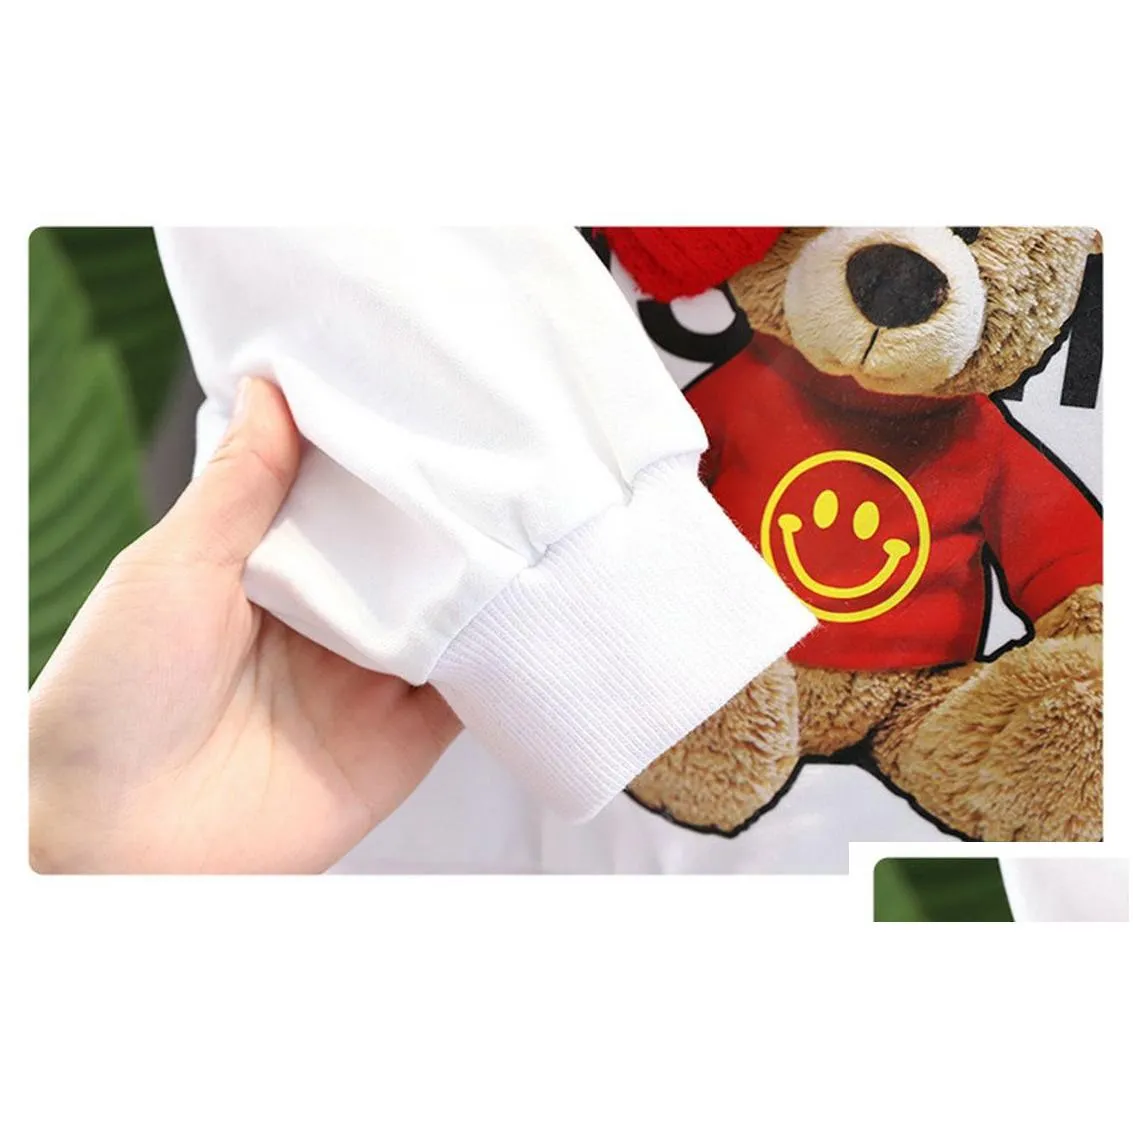 Toddler Kids Baby Boys Clothes Set Long-sleeved Bear Print Round Neck Hoodies and Elastic Long Pants